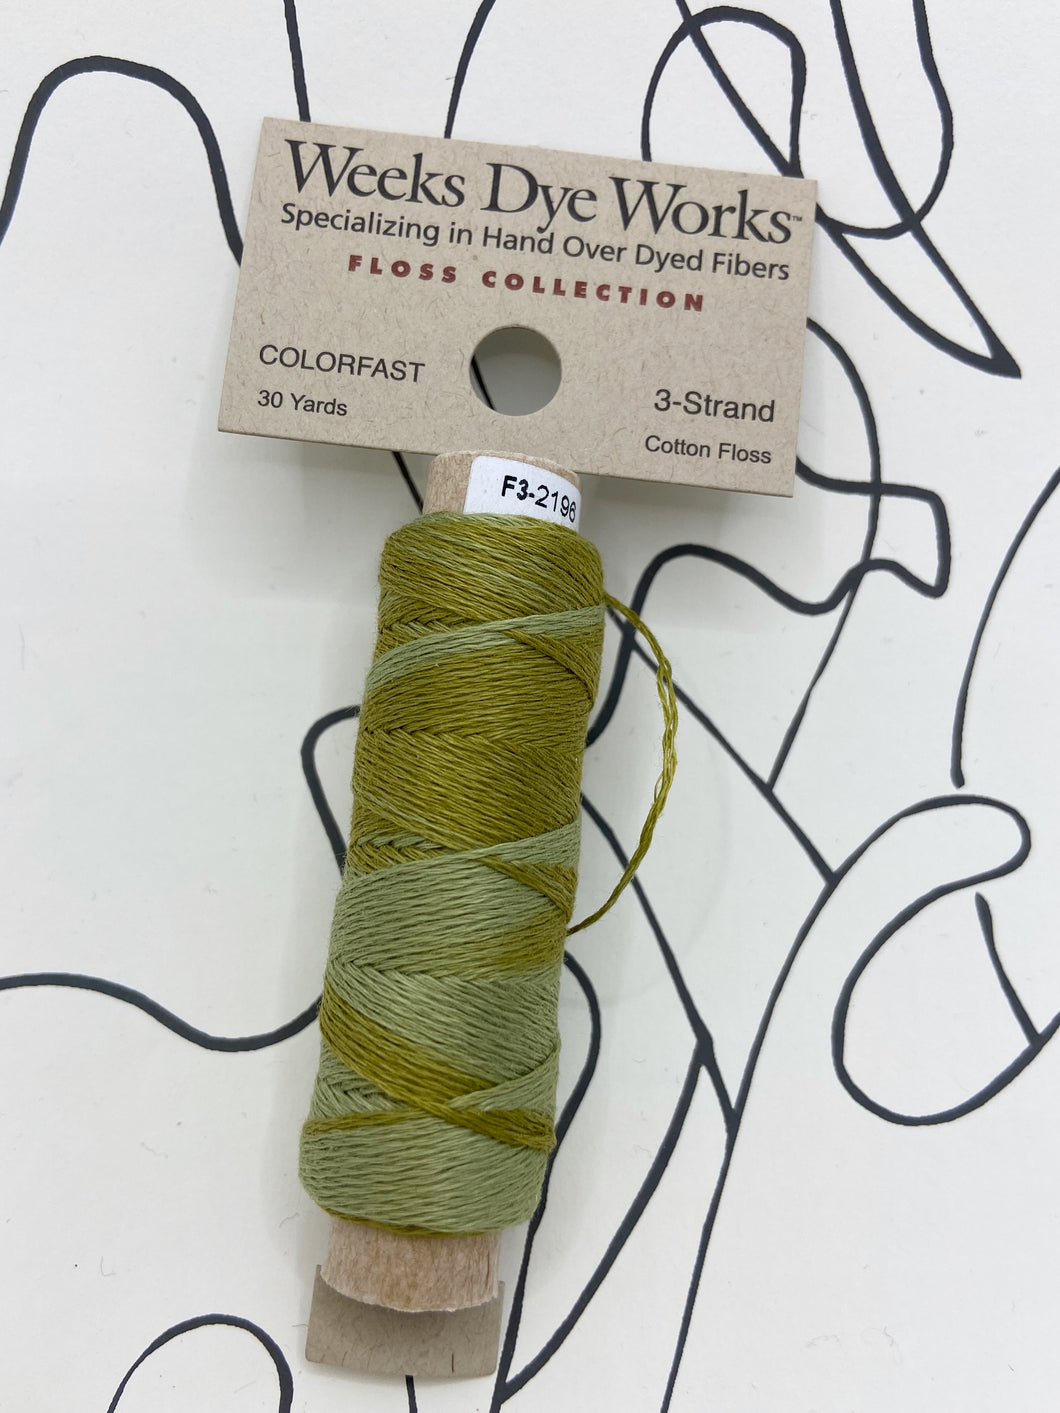 Scuppernong (#2196) Weeks Dye Works 3-strand cotton floss